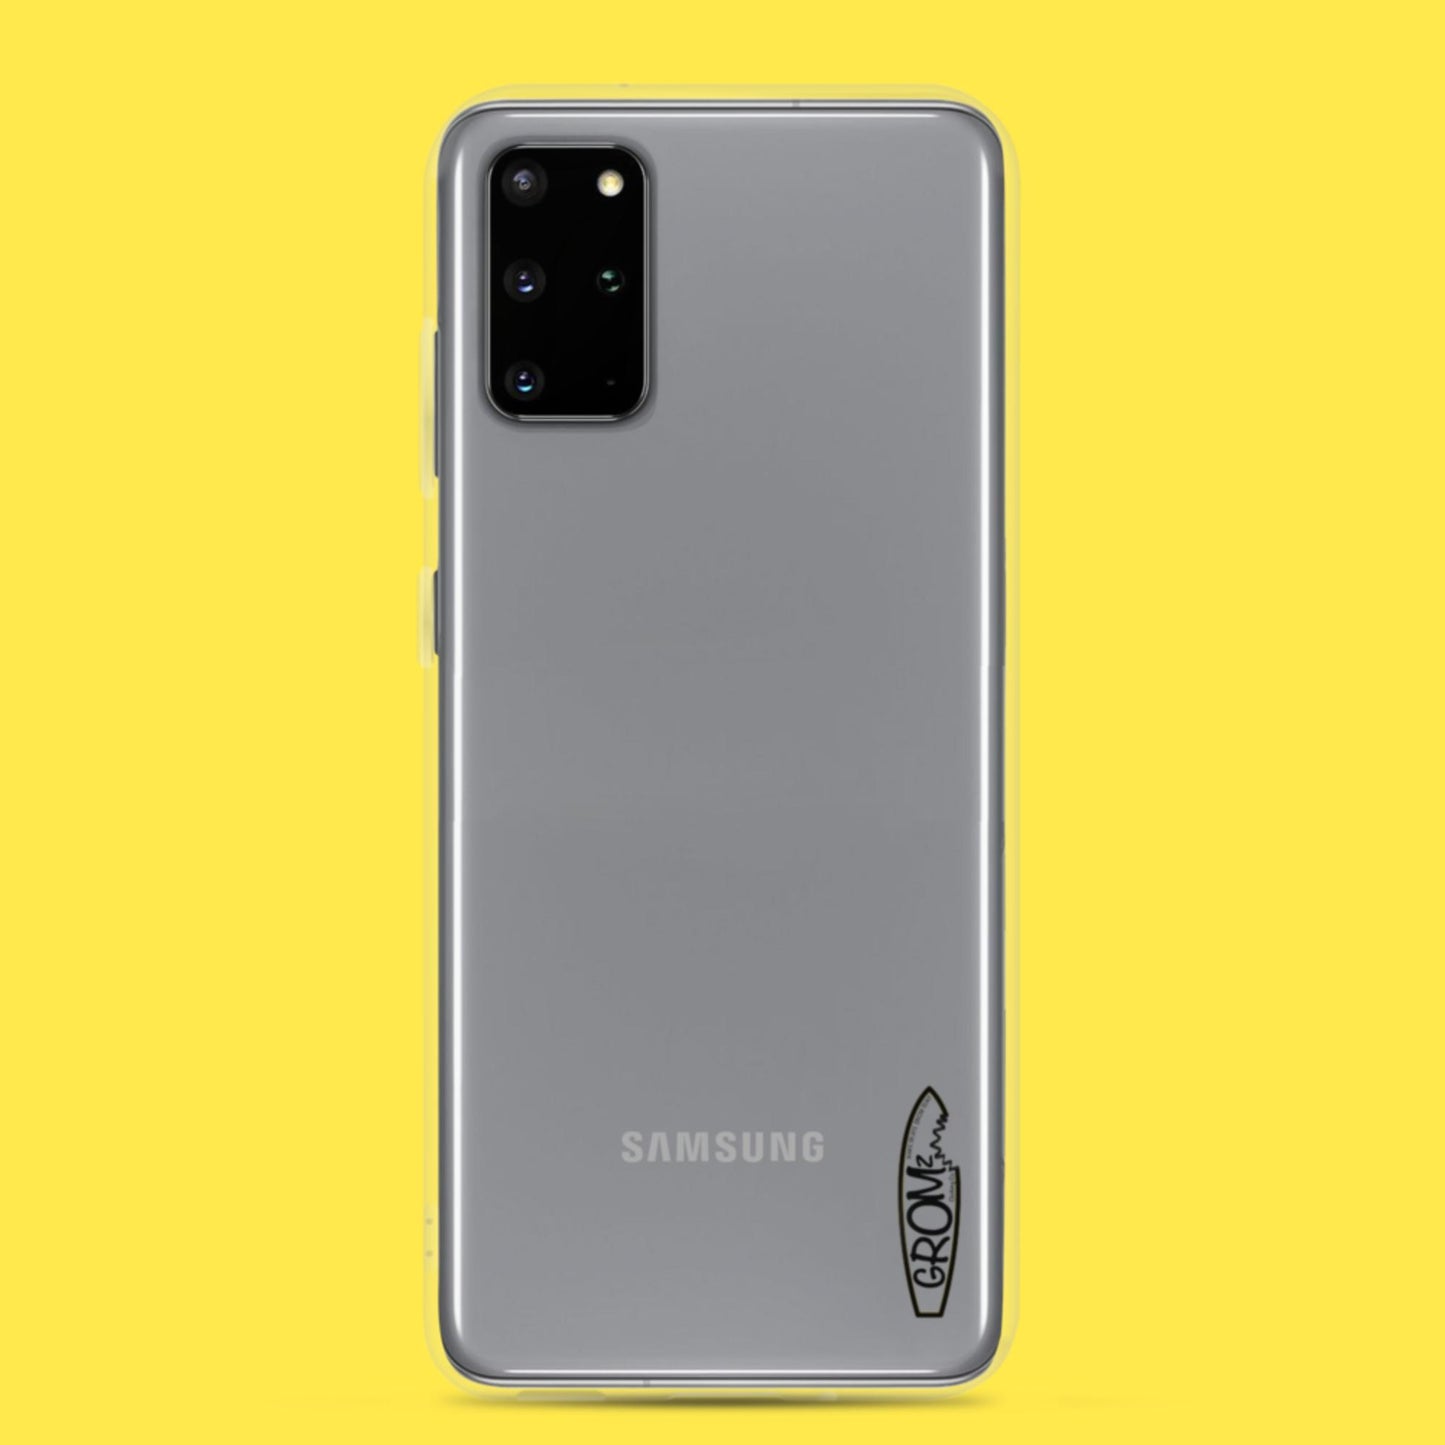 Clear Samsung Case "paddle paddle" Collection by GROMz Clothing Co.